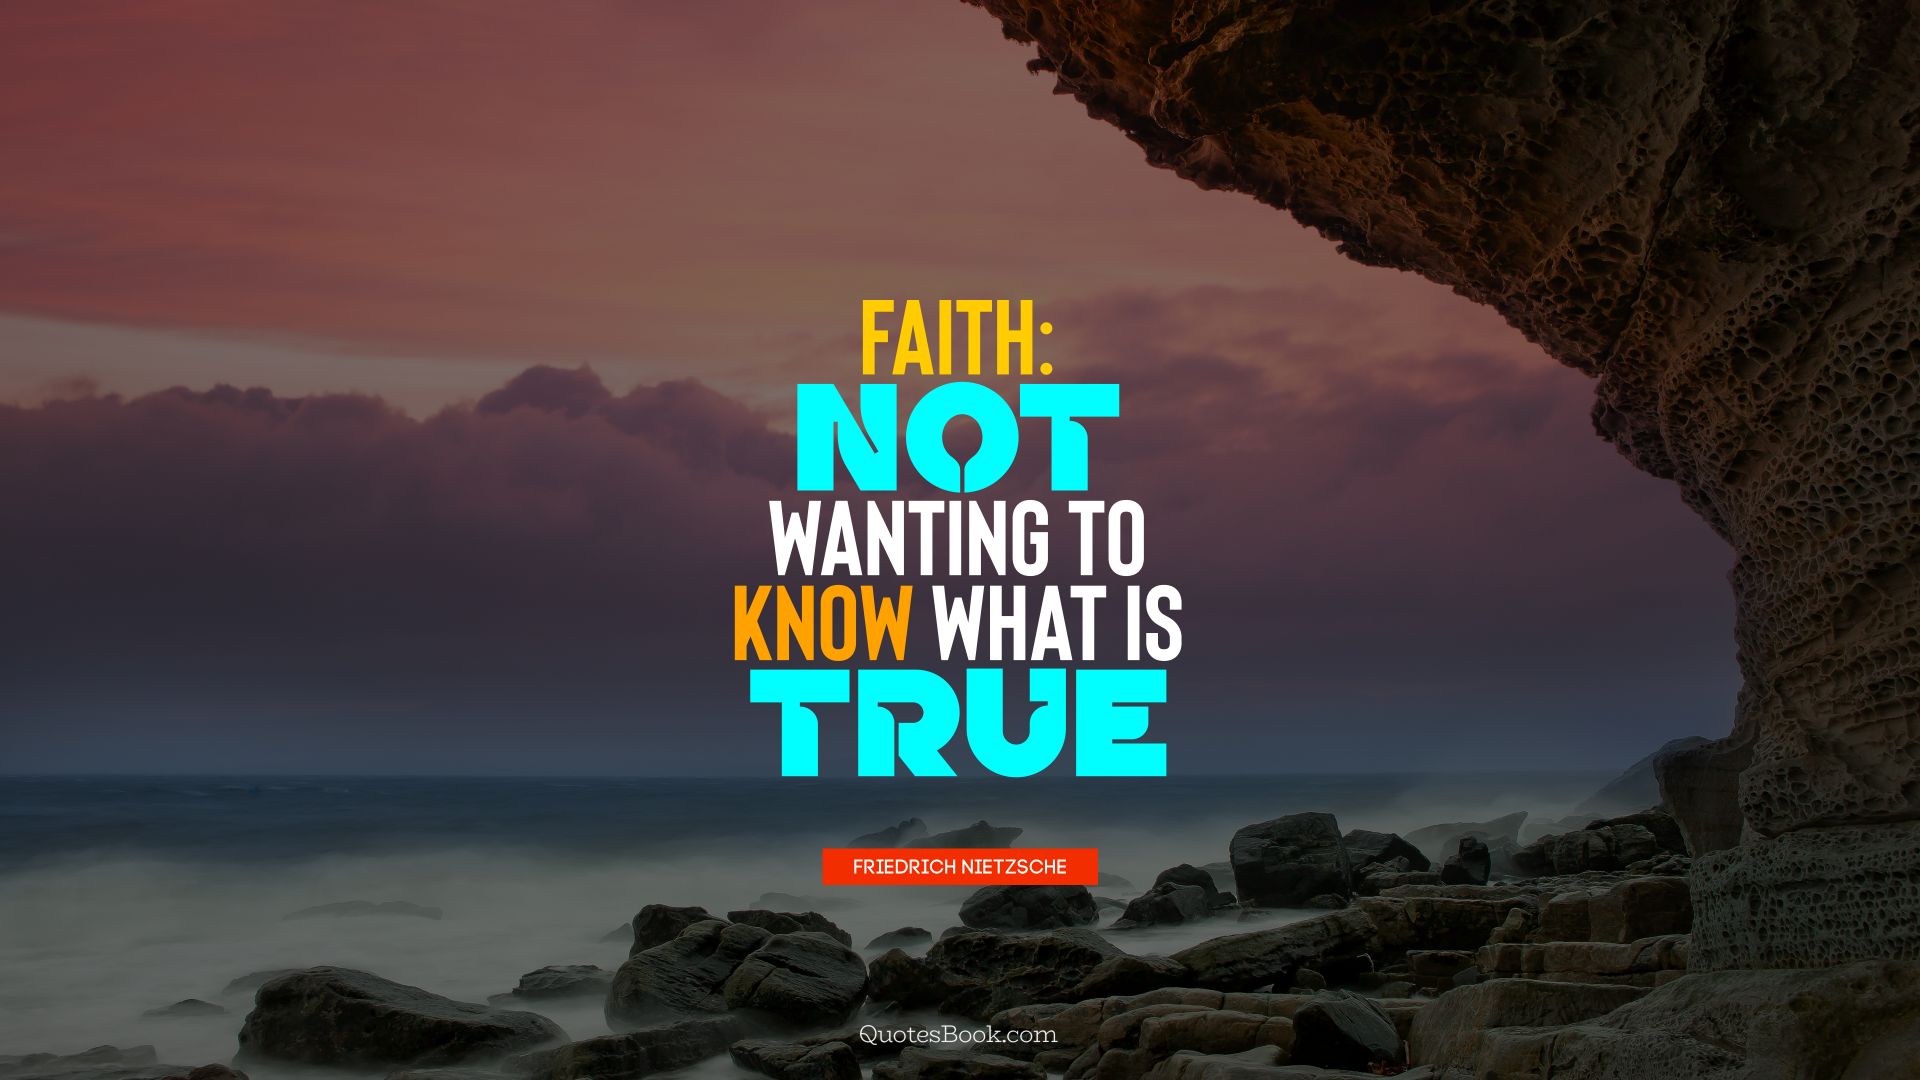 Faith: not wanting to know what is true. - Quote by Friedrich Nietzsche